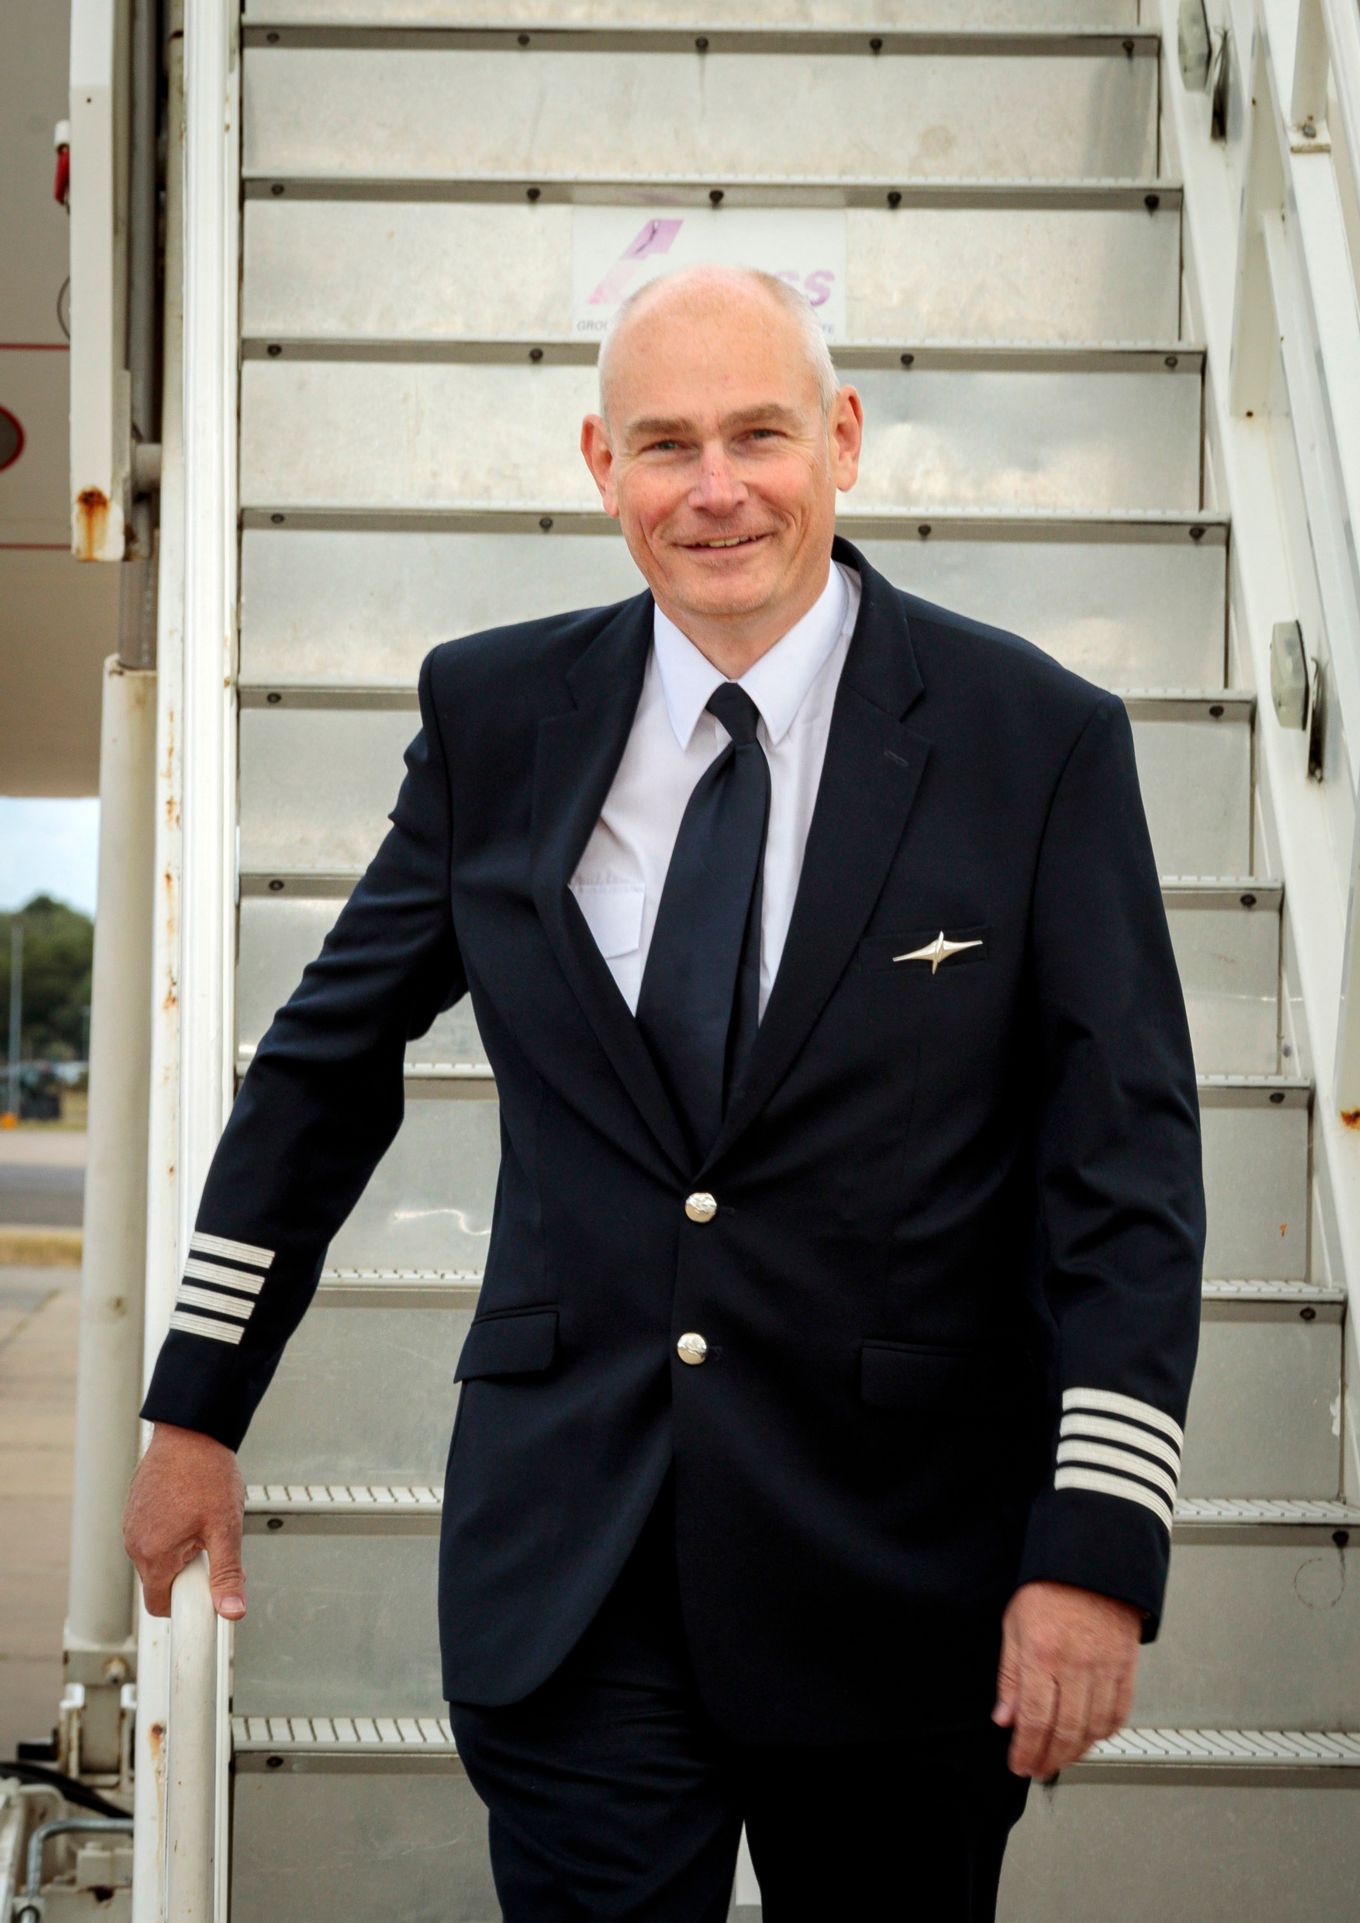 Captain Dave Hall, former Vickers VC-10, and current AirTanker Voyager pilot